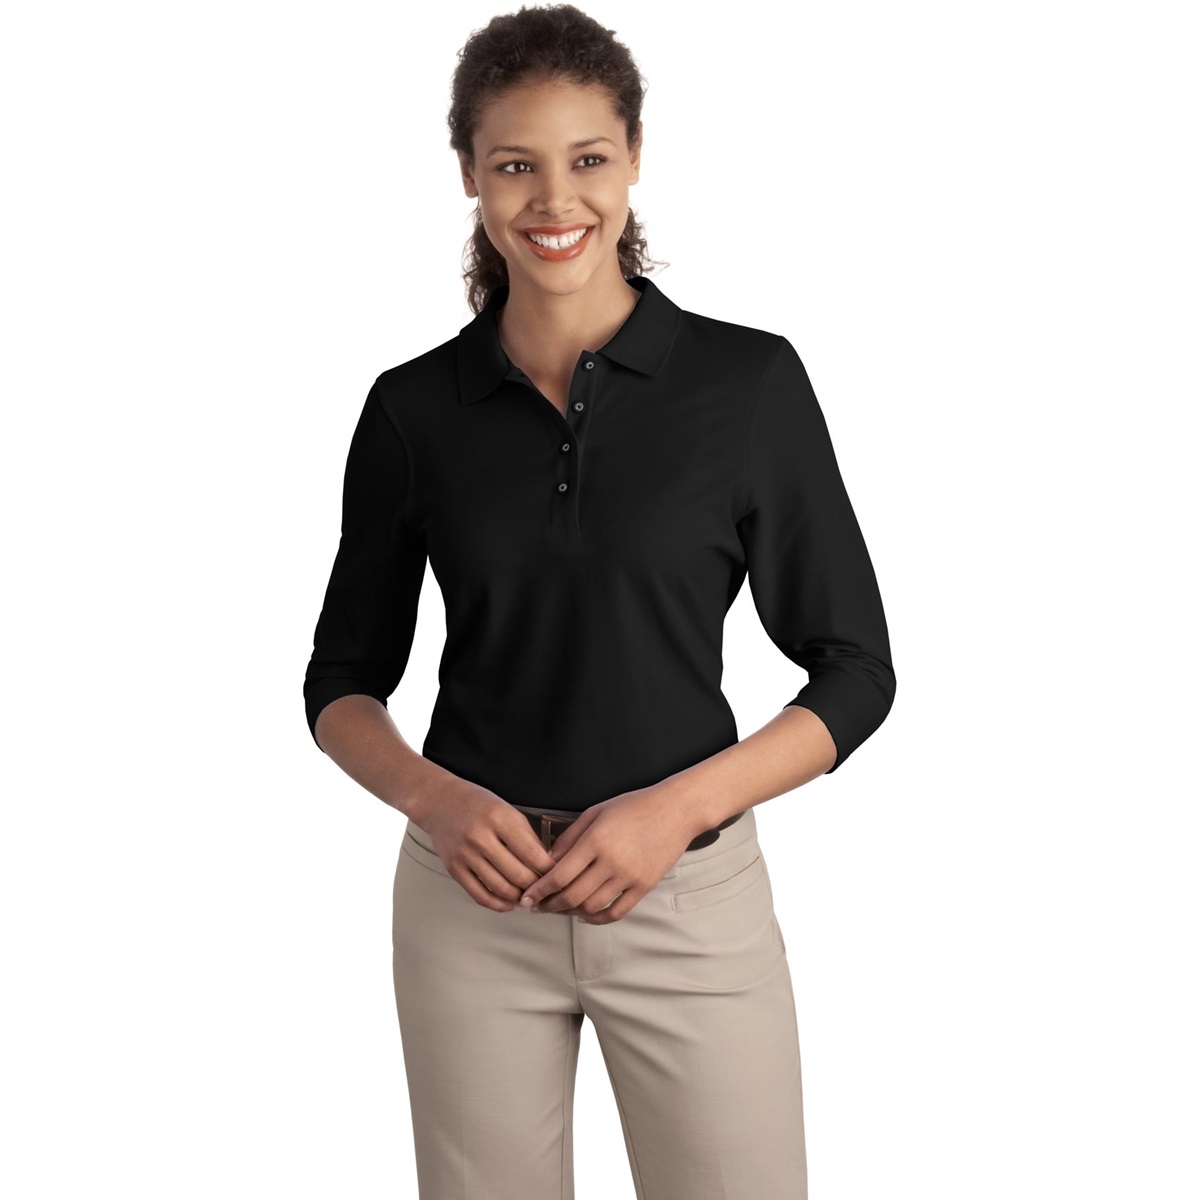 Port Authority L562 Ladies Silk Touch 3/4-Sleeve Polo - Black